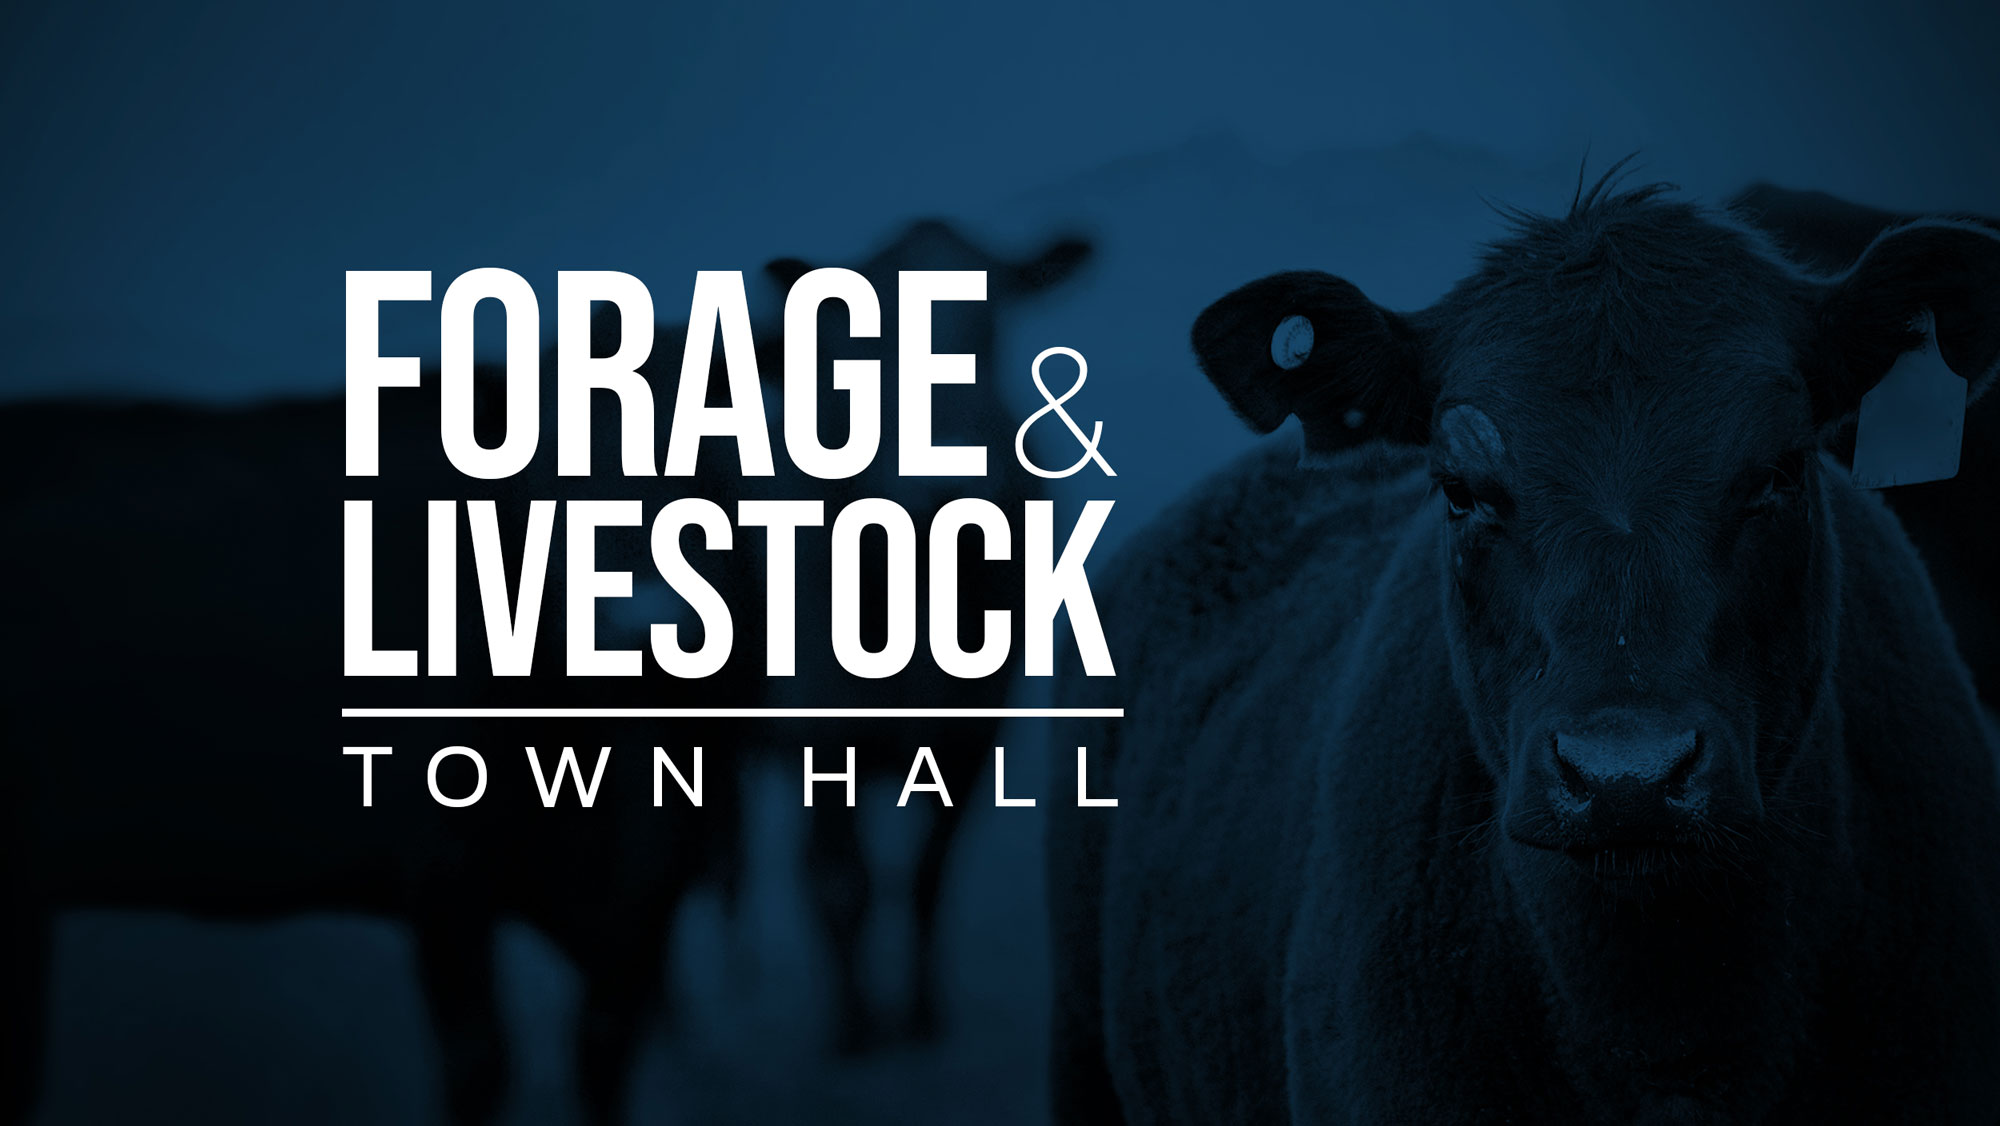 Forage & Livestock Town Hall with cow